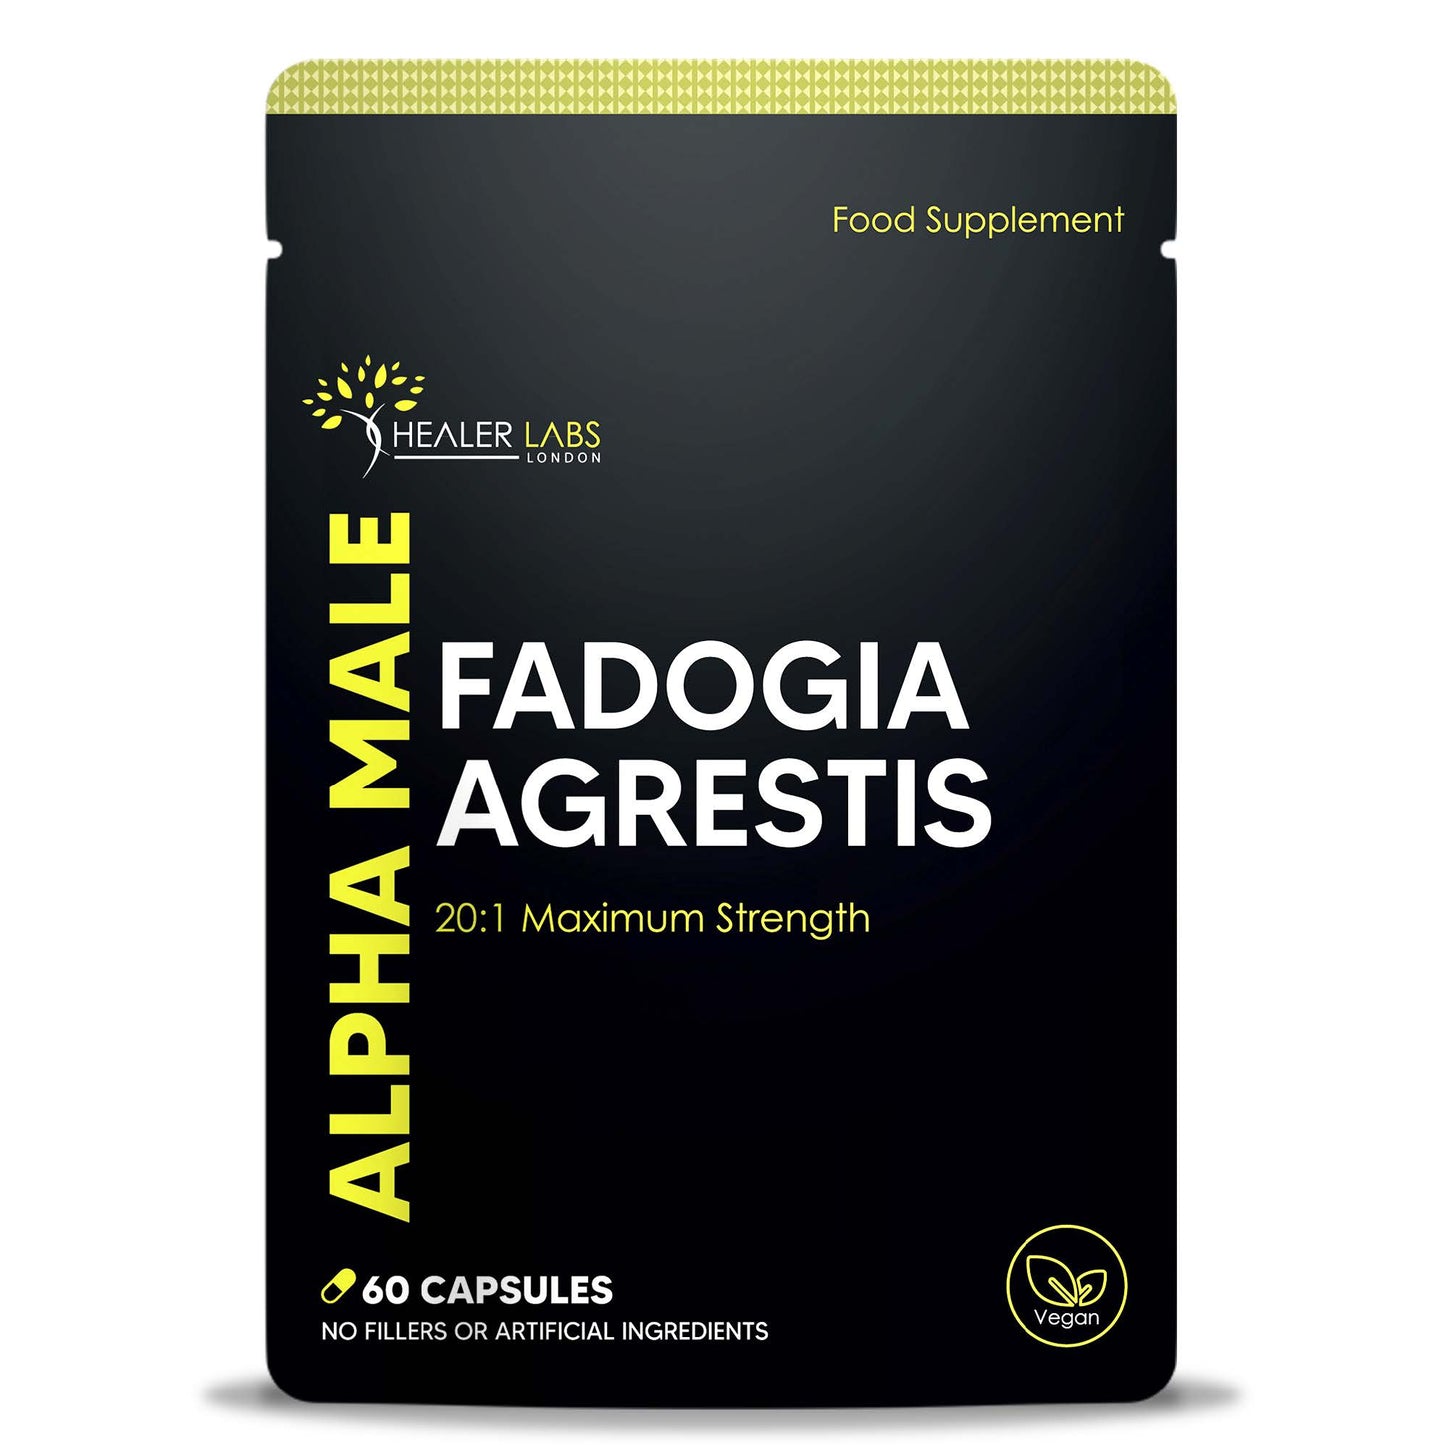  Healer Labs - Organic Fadogia Agrestis 20:1 Extract - The Beauty Corp.